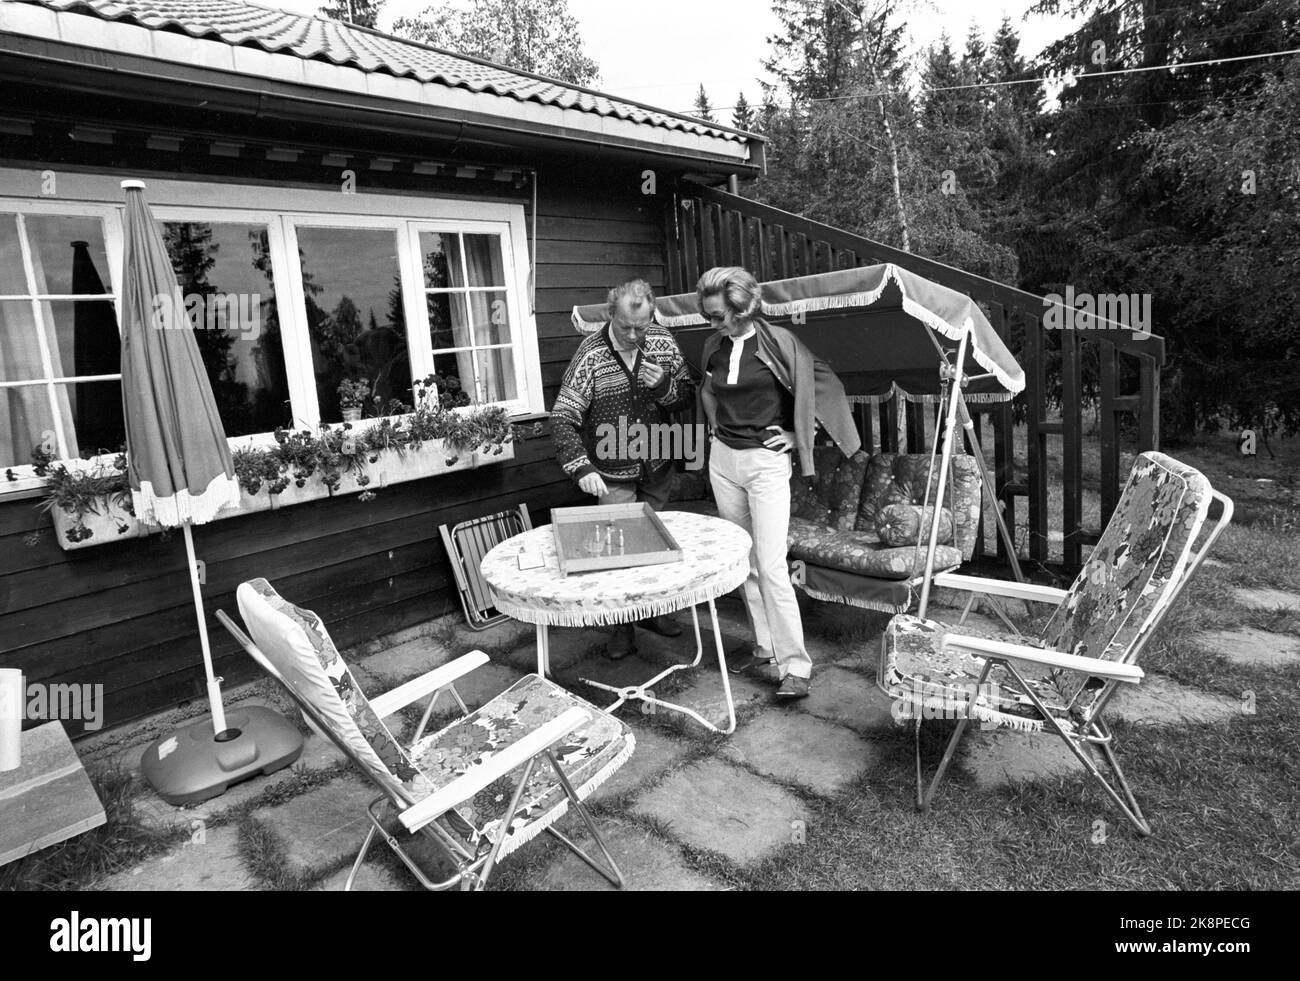 Hamar in the summer of 1970. West Germany's Chancellor Willy Brandt and Mrs. Rut Brandt bought a cabin in Vangsåsen in 1965 at Hamar, and here they spend their summer holidays with the family. Here the married couple on the patio at the cabin, where they enjoy a board game. Photo: Ivar Aaserud / Current / NTB Stock Photo